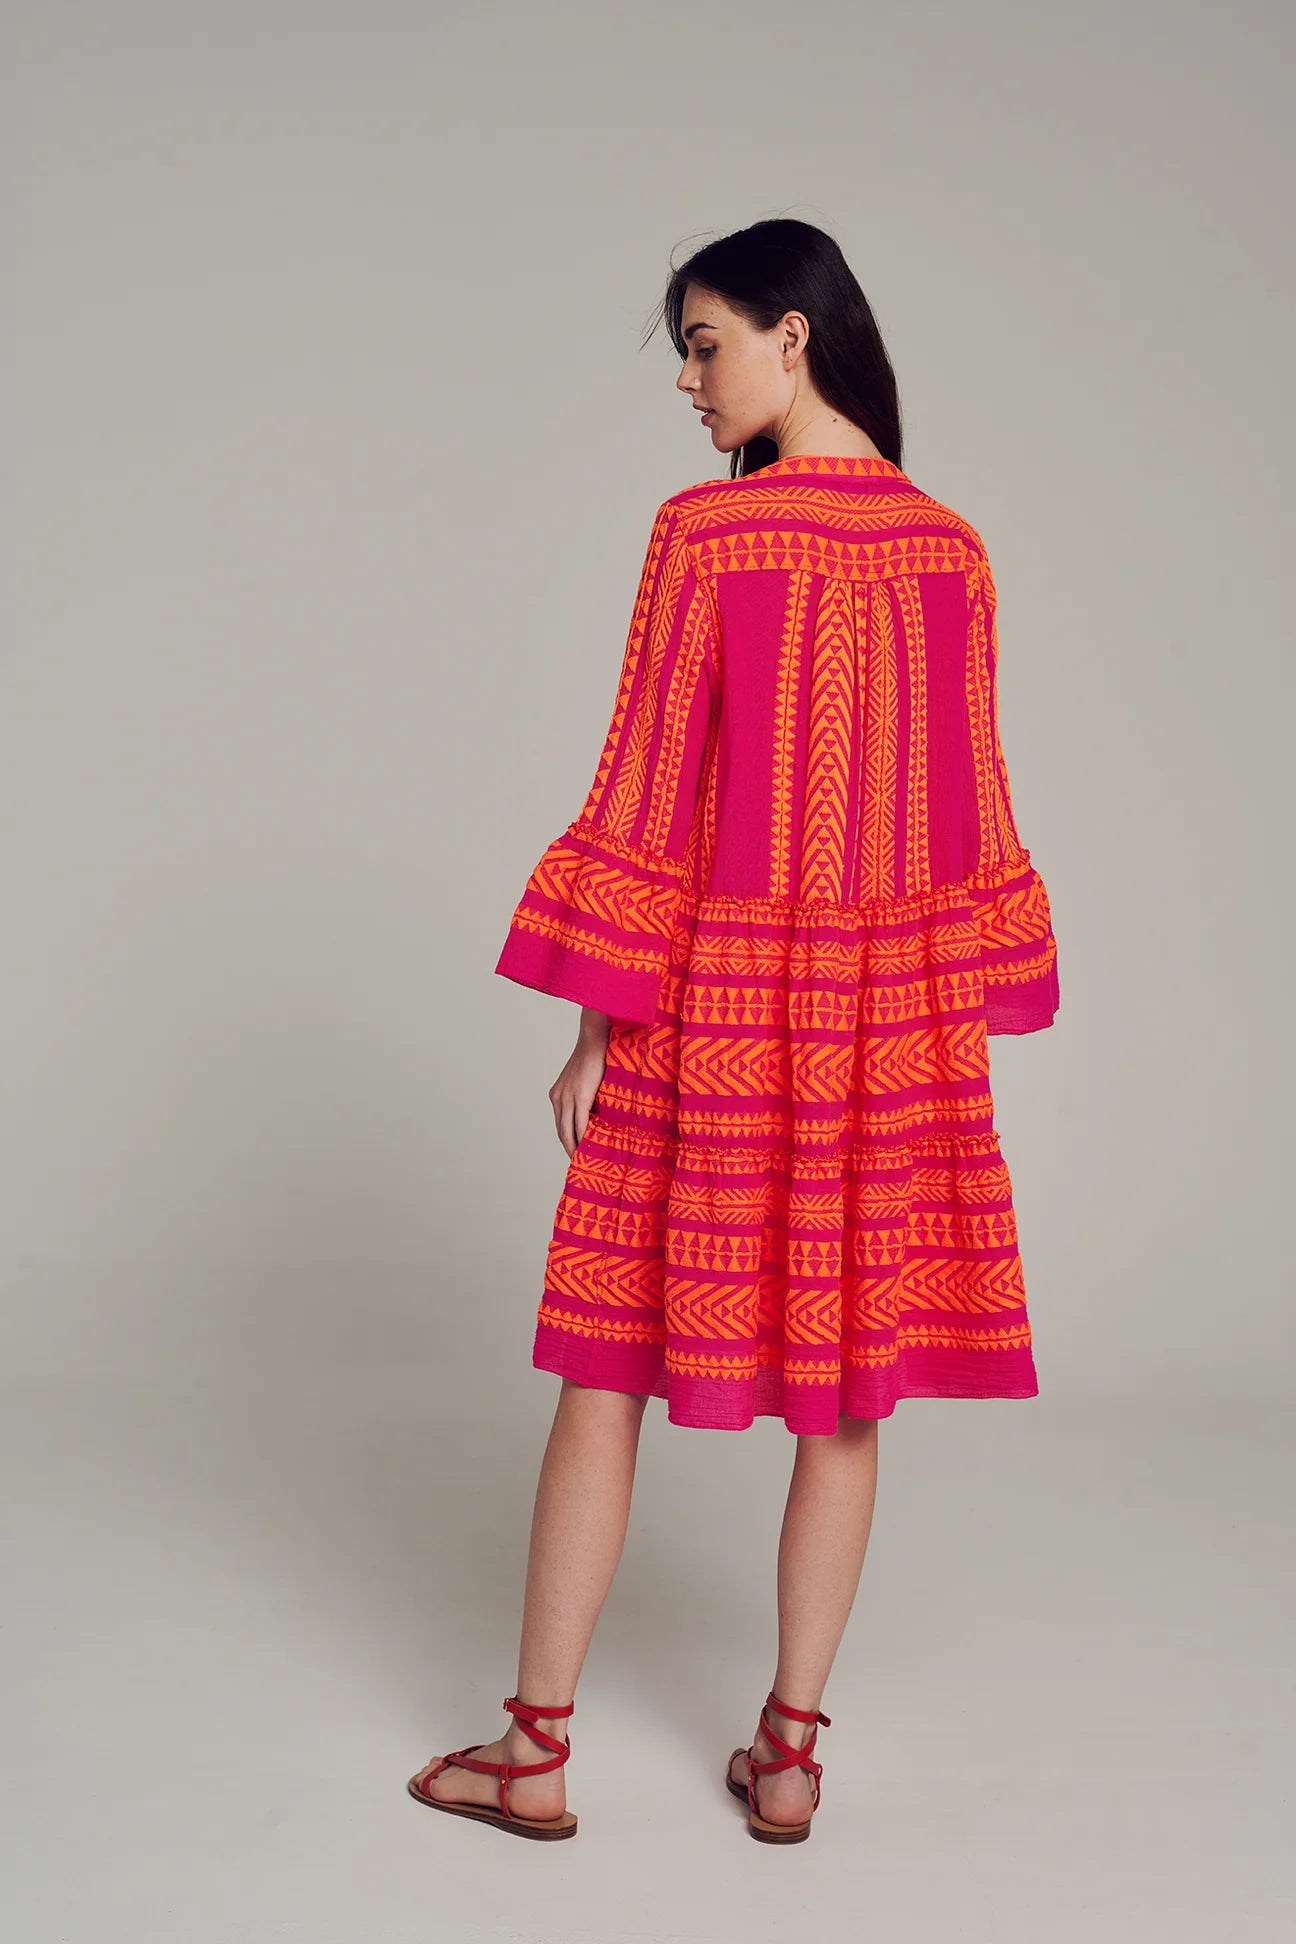 Pink notch neck midi dress with long fluted sleeves and tripe tiered A line skirt with neon orange embroidery throughout